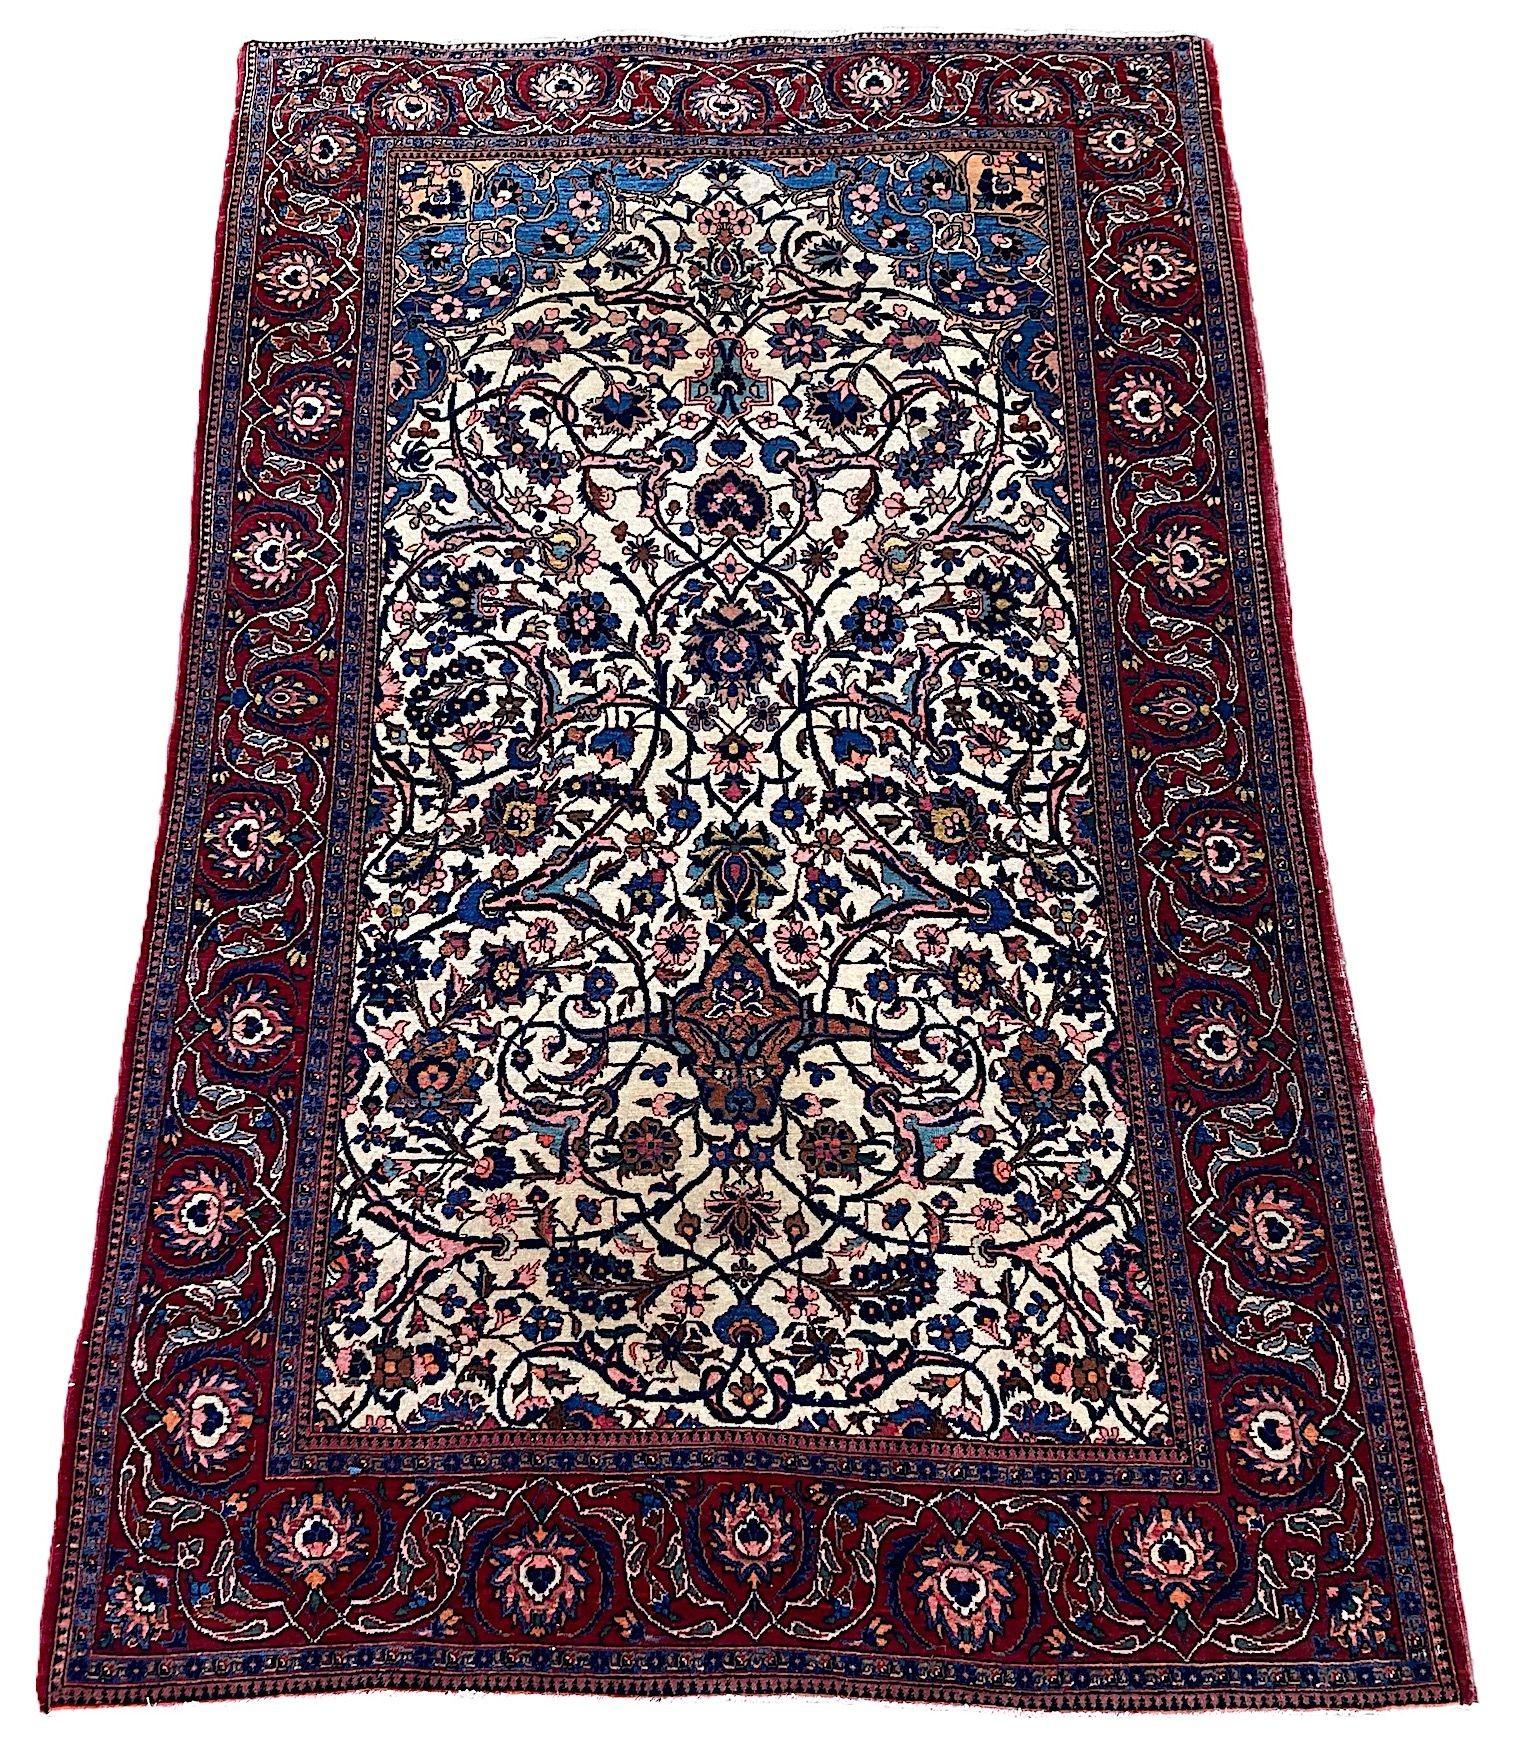 A wonderful antique Kashan rug, hand woven circa 1920. The rug features an all over design of large flower heads and palmettes connected by scrolling vines and arabesques on an uncommon ivory field and red border. An elegantly drawn design with